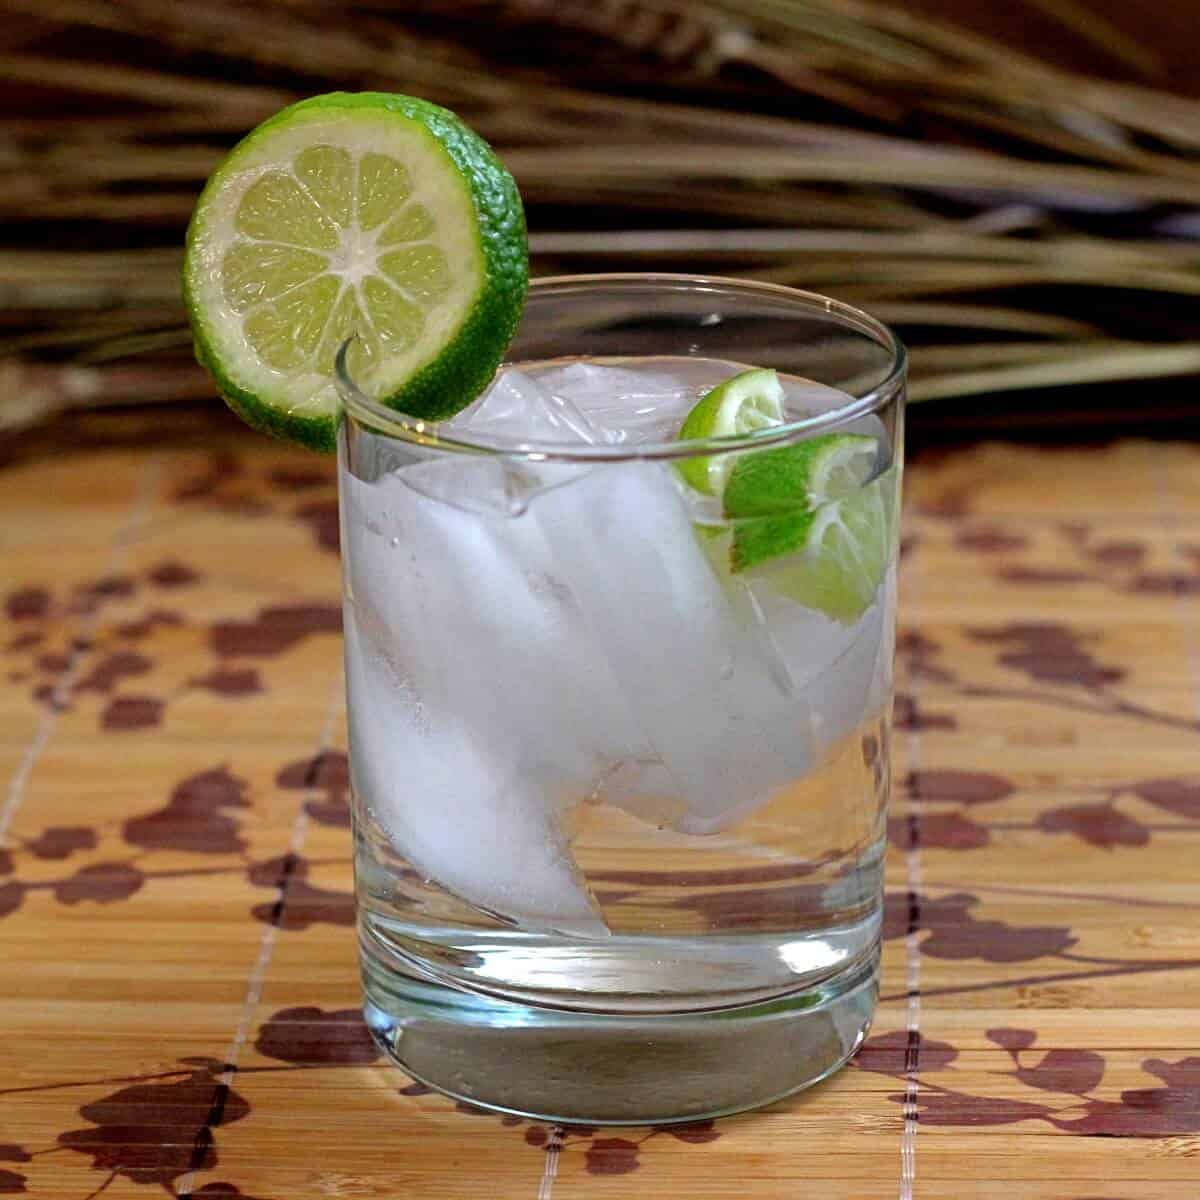 The Caipirinha is considered the national cocktail of Brazil, and for good reason. It's made from their most popular distilled spirit - a very strong rum called Cachaca - with muddled limes and sugar.